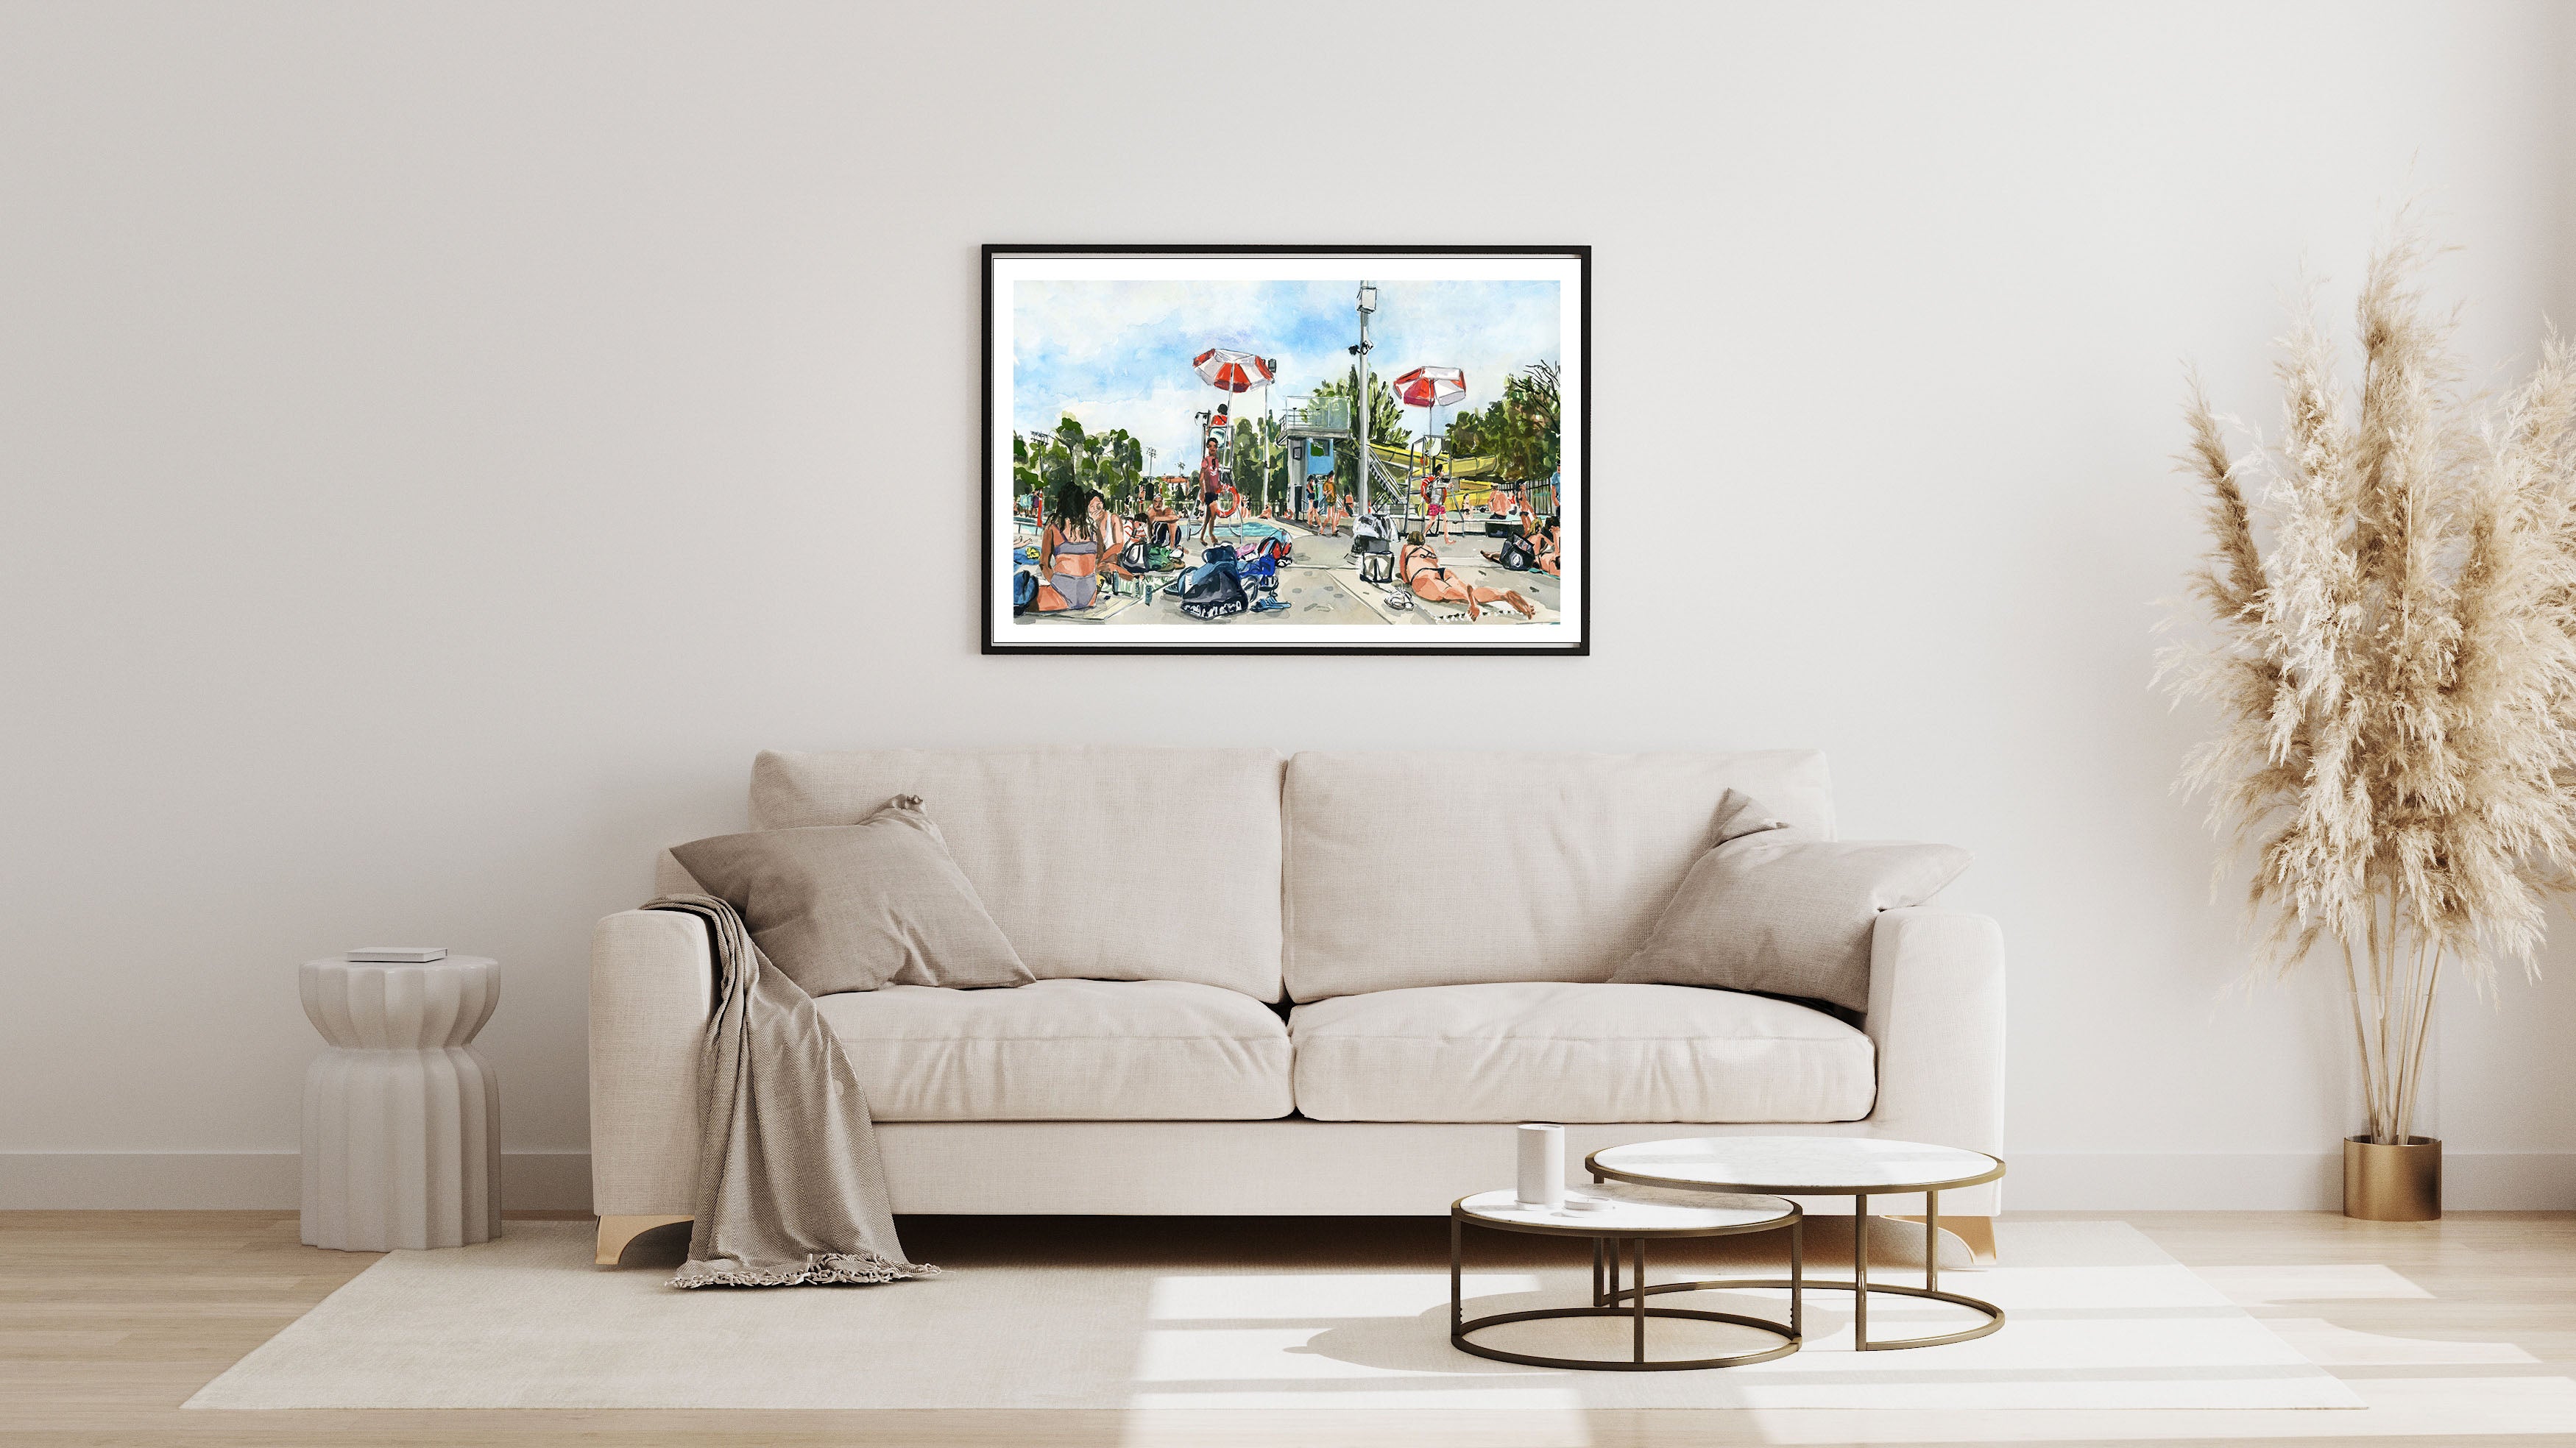 Summer pool art print of painting by Medjool Studio. Print of an original gouache painting of a summer pool scene inspired by the artist's daily life. Shows a scene at a neighbourhood pool filled with people enjoying their summer weekend.